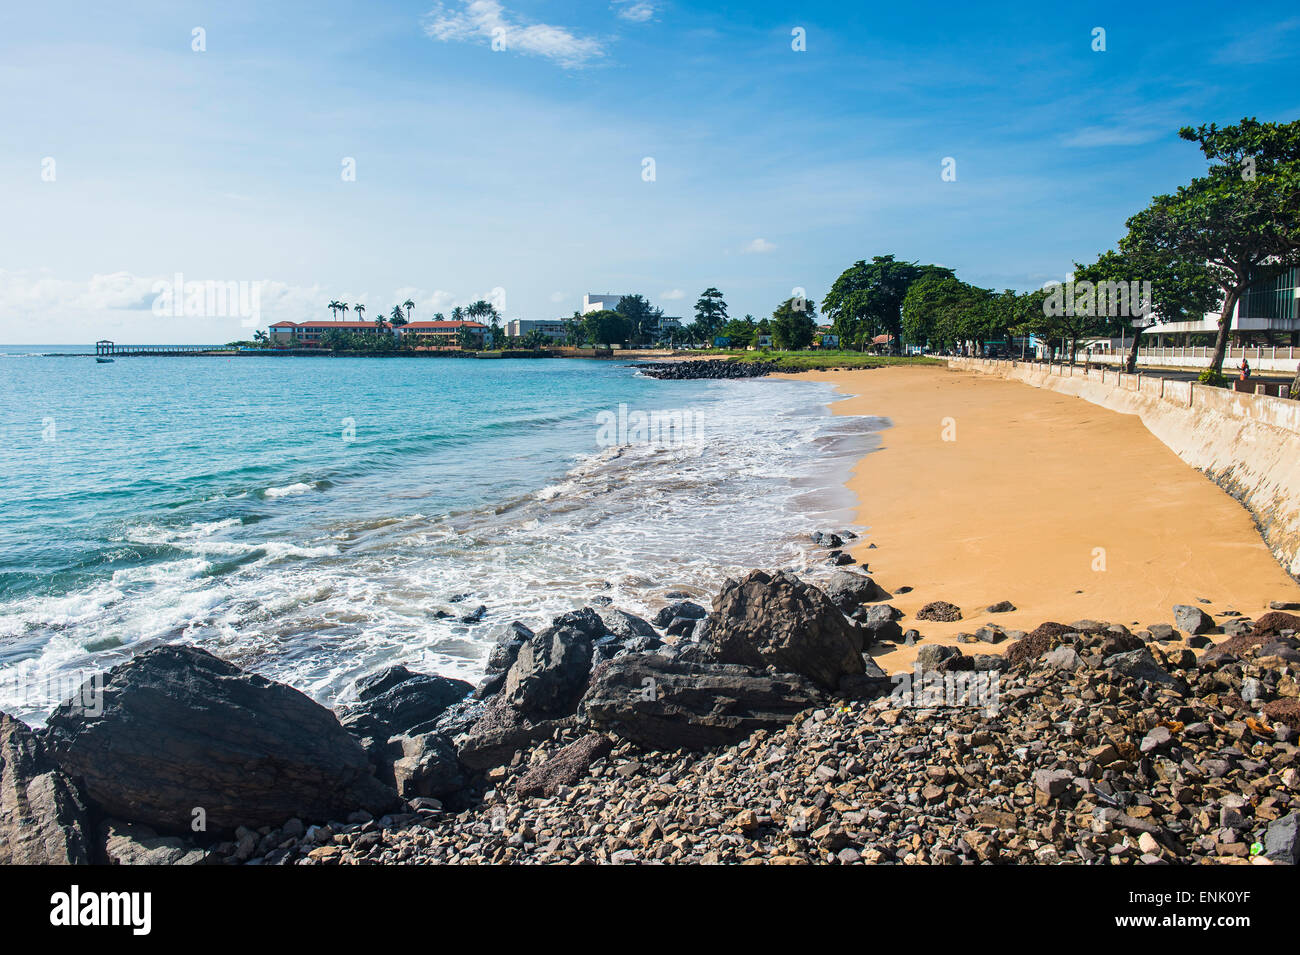 Beach in front of the Pestana five star hotel in the city of Sao Tome, Sao Tome and Principe, Atlantic Ocean, Africa Stock Photo